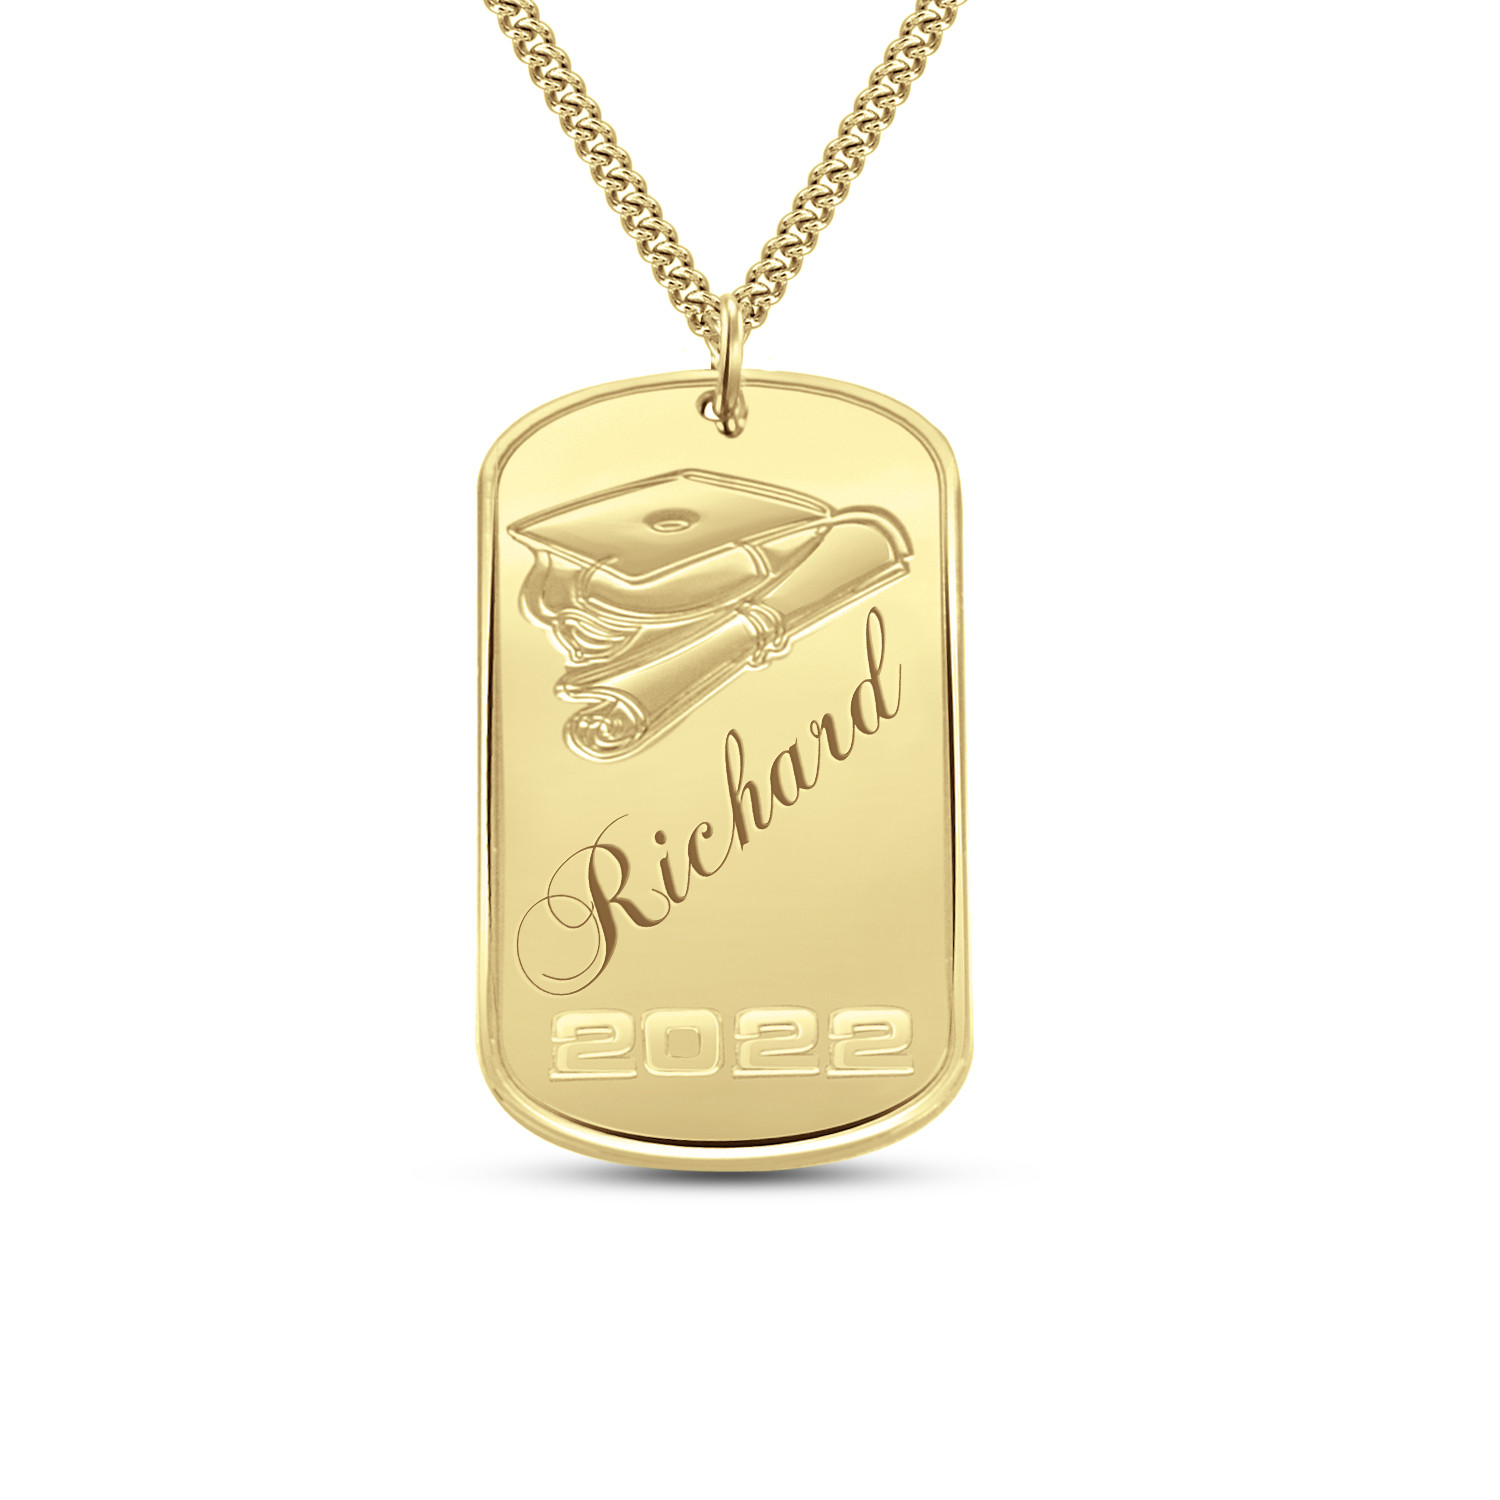 42mm x 22m DogTag Pers Pendant